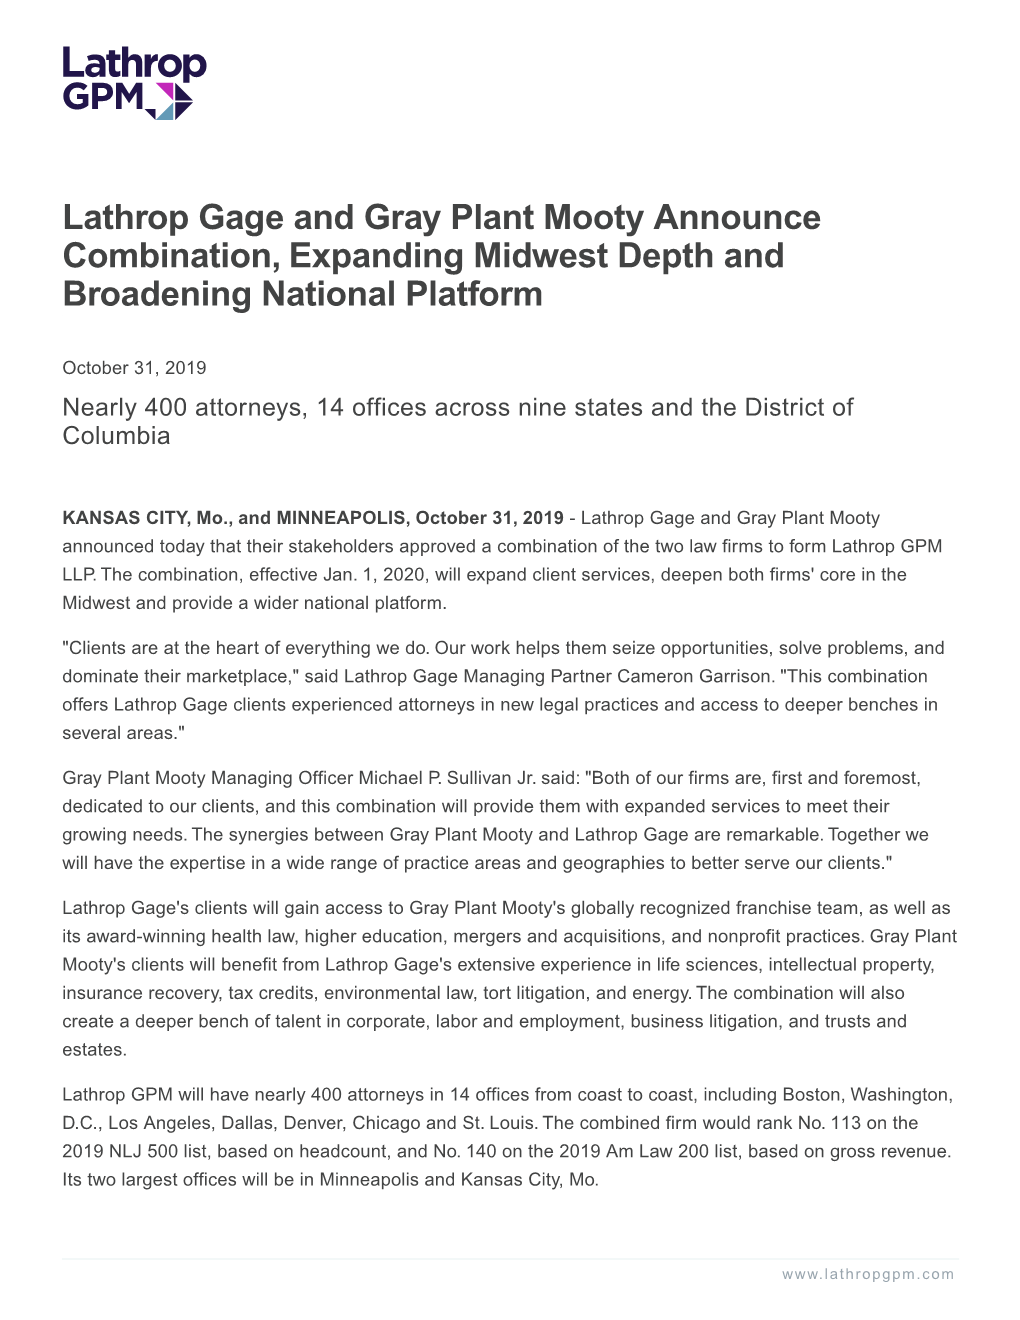 Lathrop Gage and Gray Plant Mooty Announce Combination, Expanding Midwest Depth and Broadening National Platform